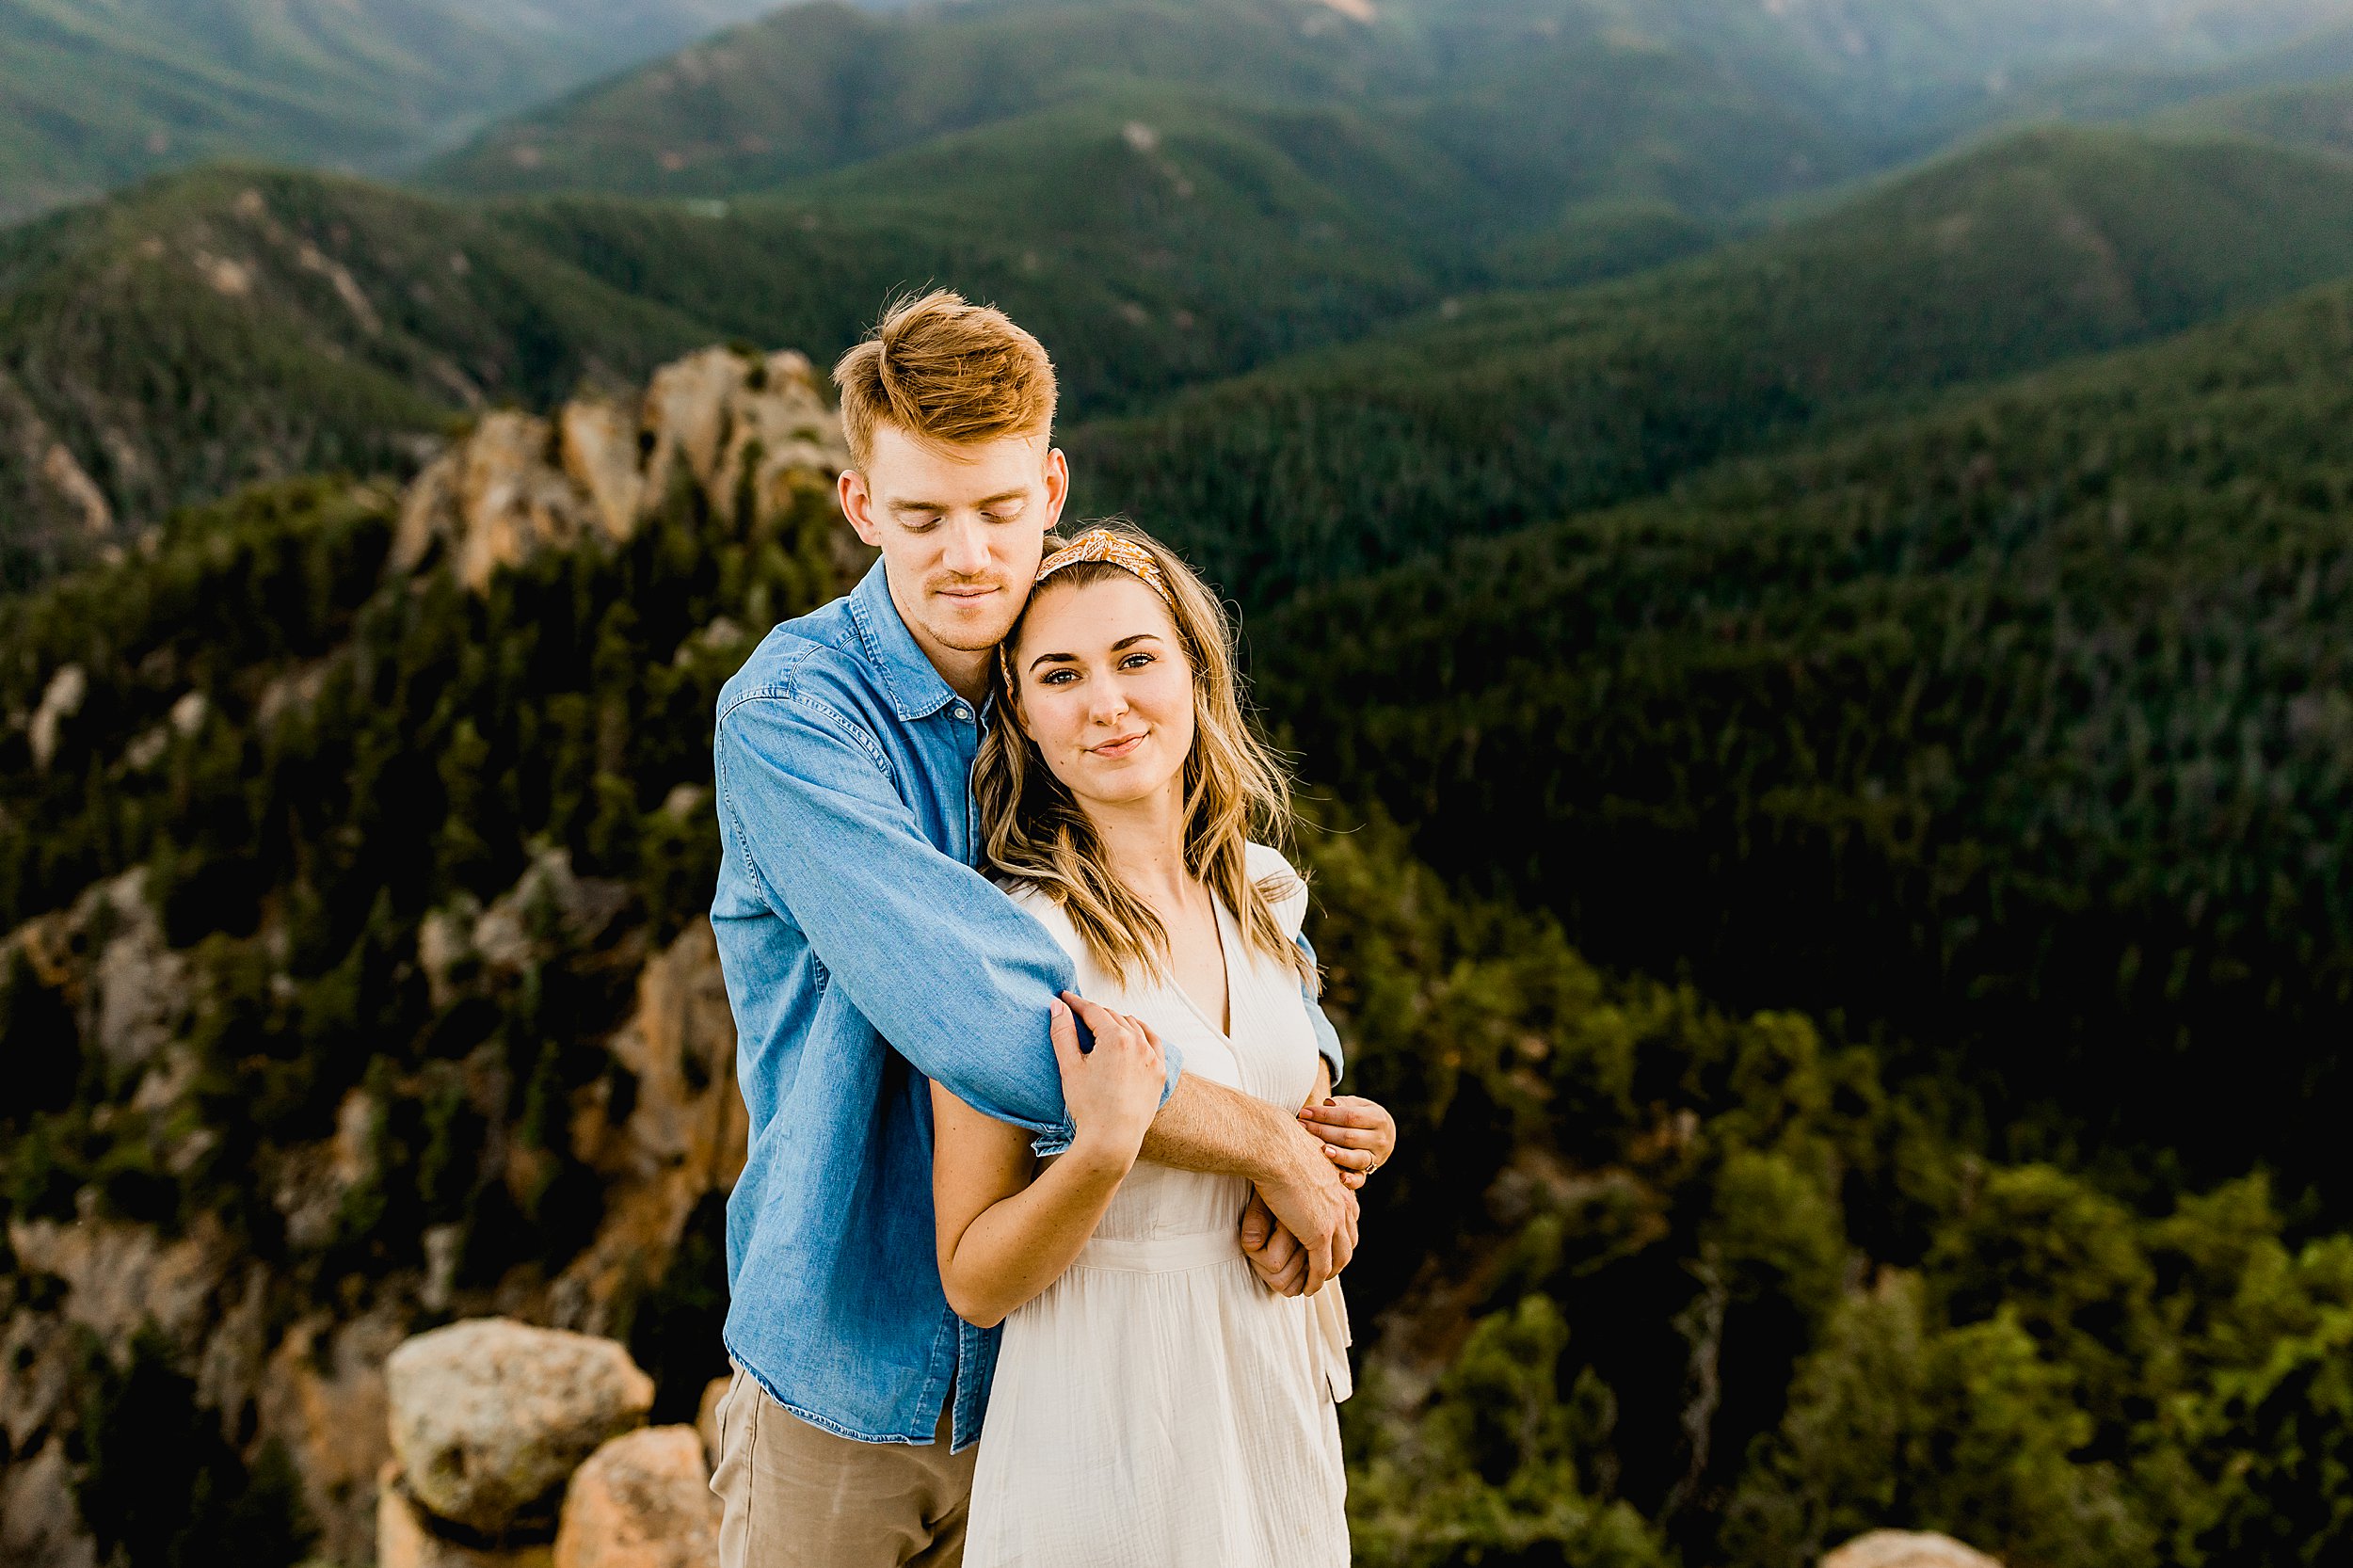 colorado mountain engagement photos, photographer captures couples hiking engagement photos with beautiful colorado mountain scenery in the background